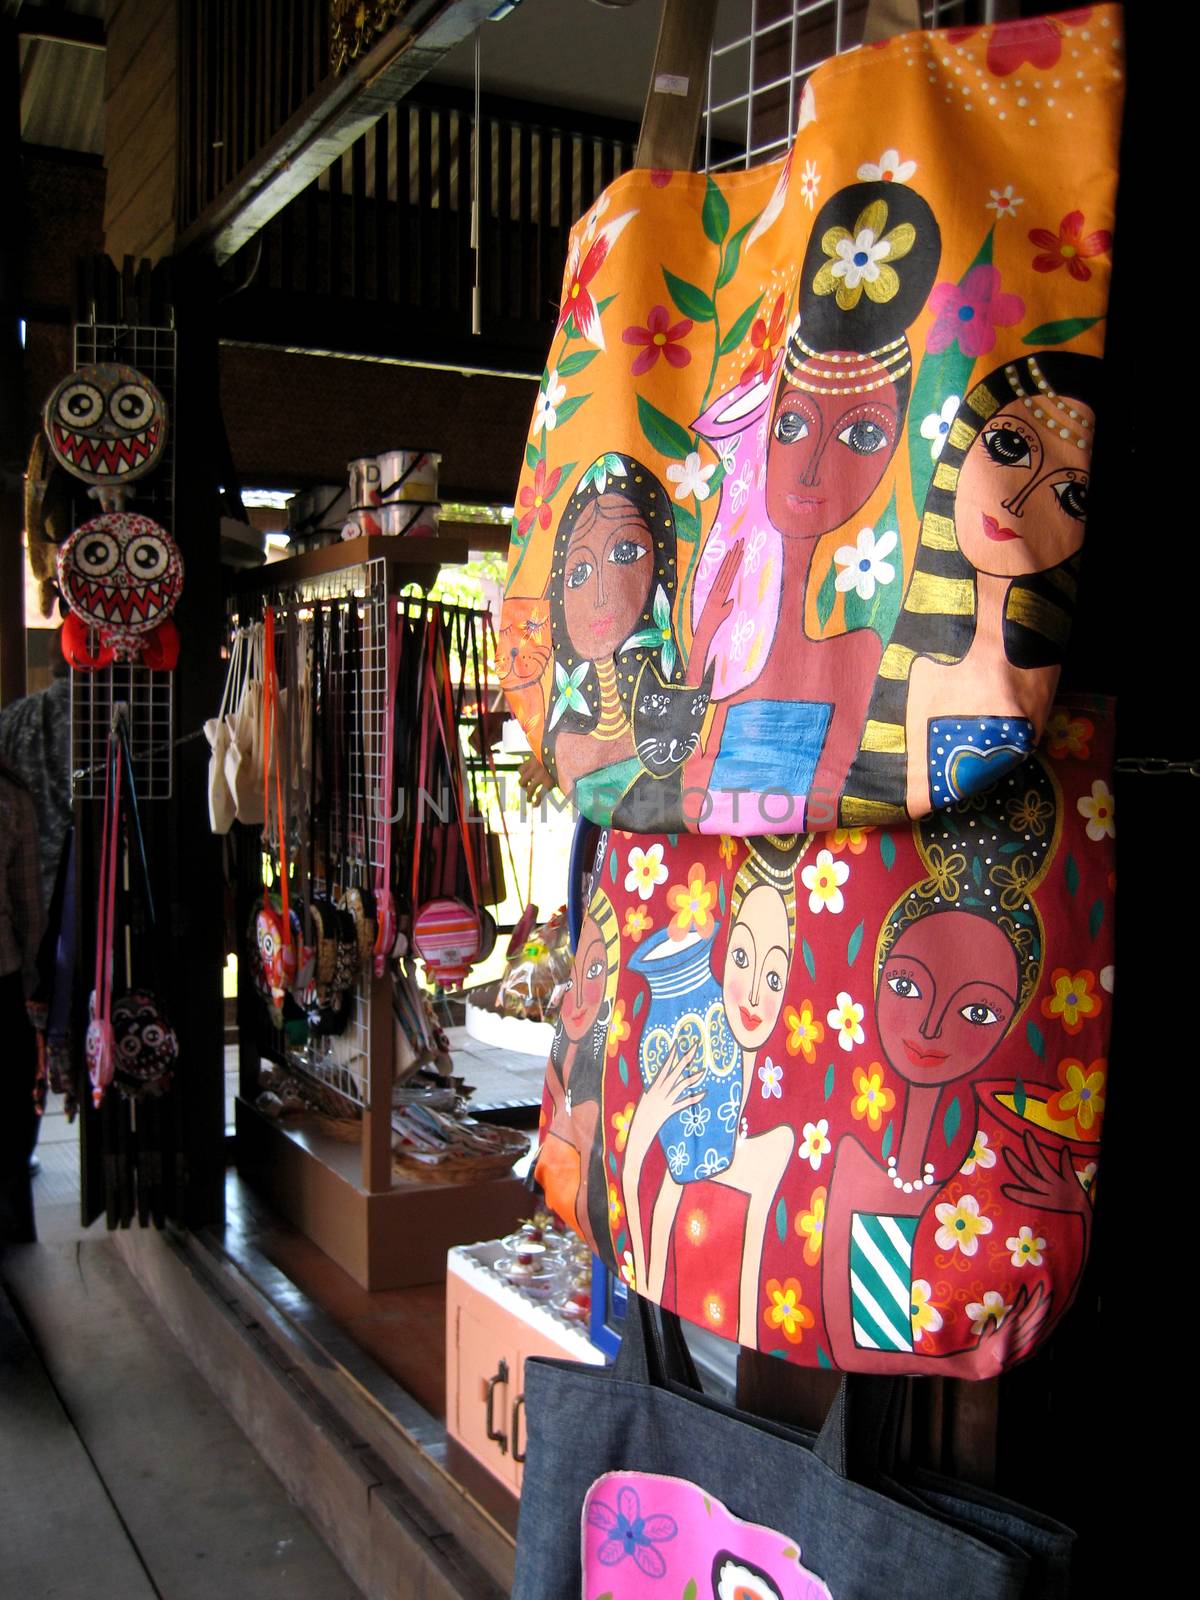 Colorful fabric bag for sell on wood wall in the ancient market in Asia.